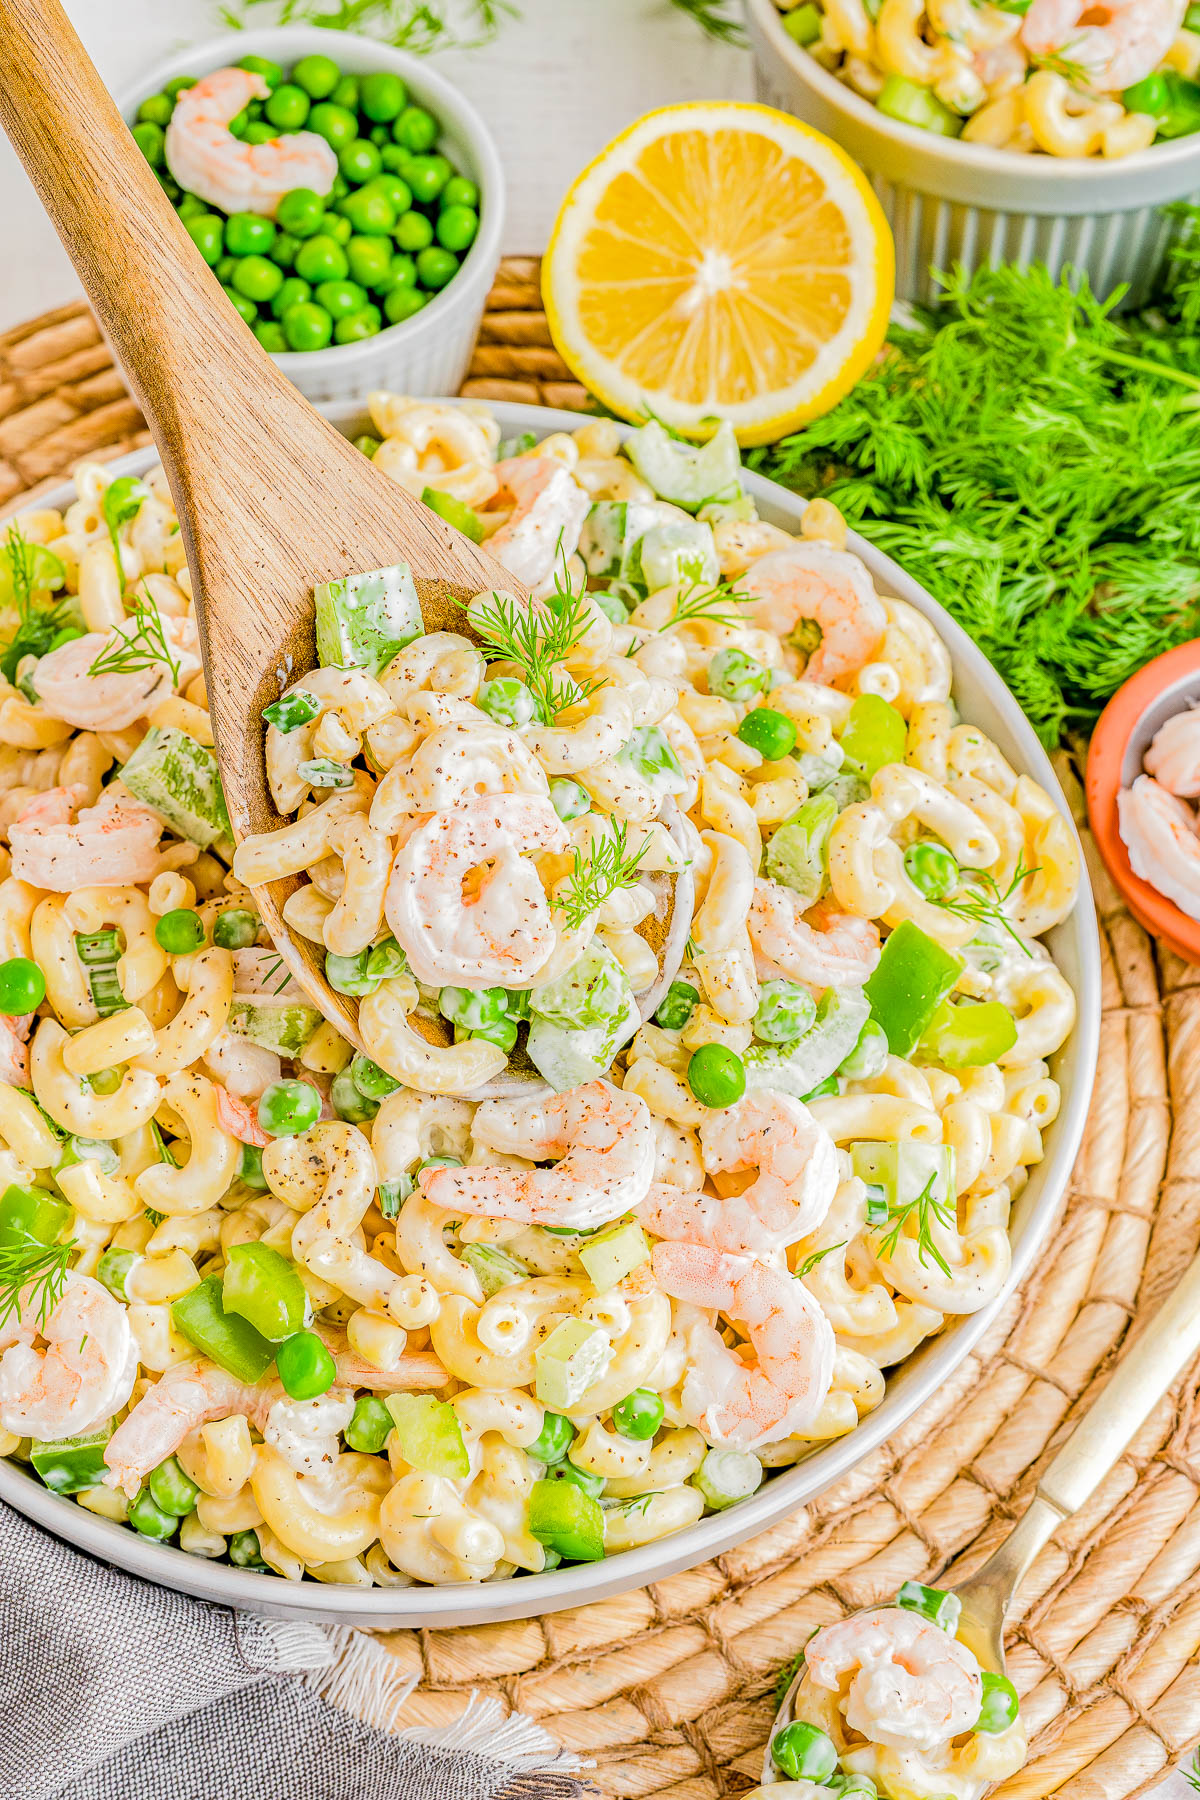 A vibrant bowl of shrimp pasta salad with peas, green peppers, and dill, served on a woven placemat with a wooden spoon. lemon half and bowl of peas in the background.